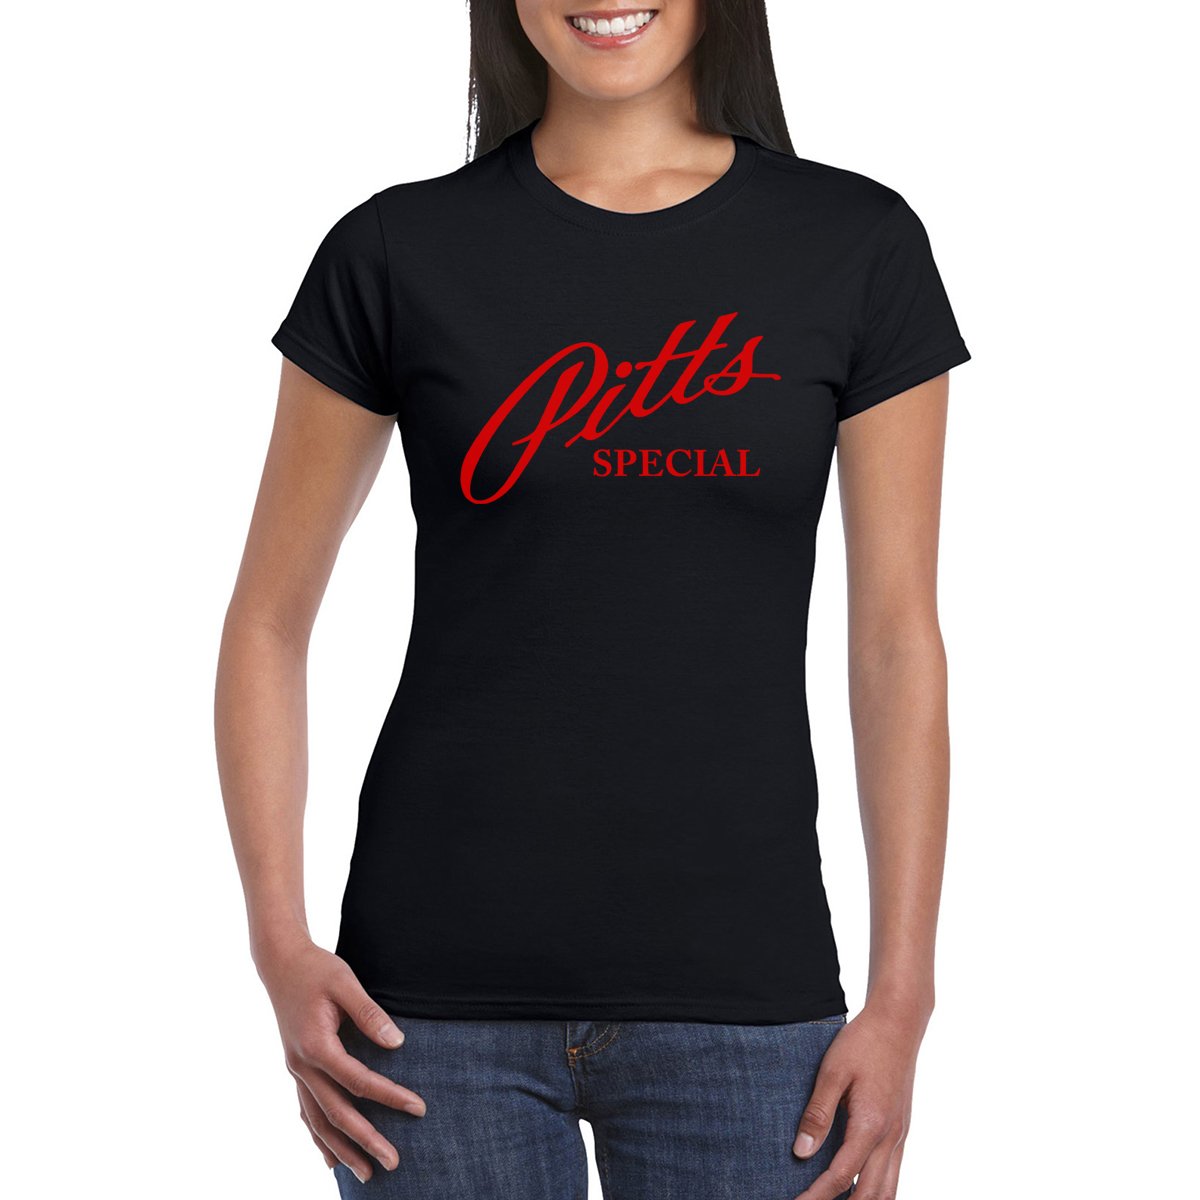 PITTS SPECIAL Women's Semi-Fitted T-Shirt